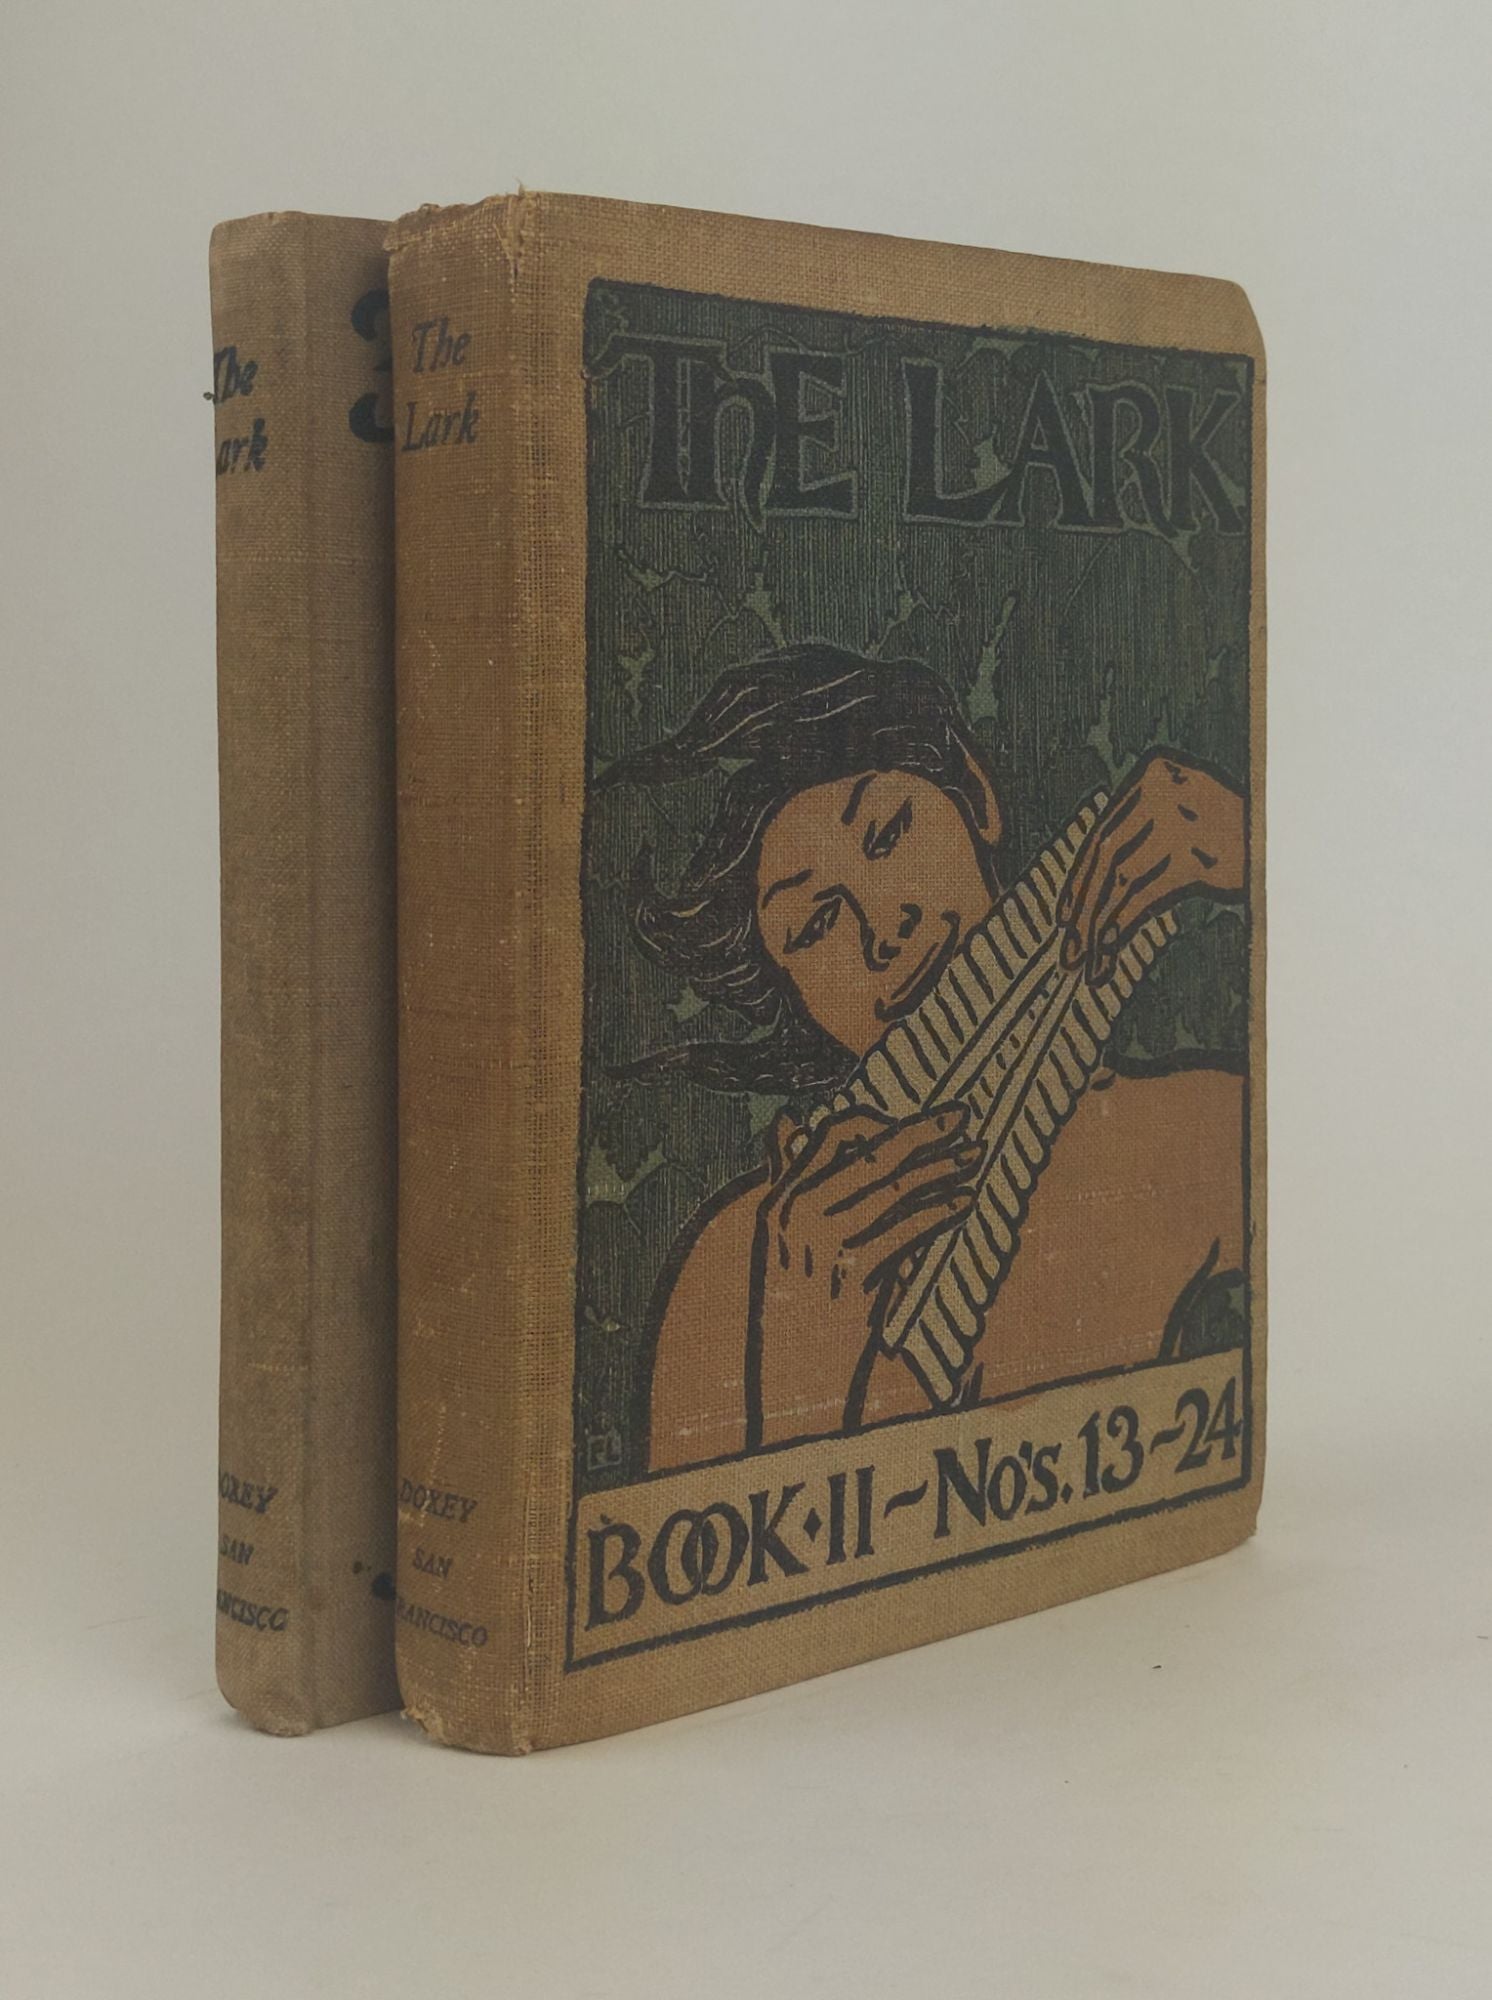 Product Image for THE LARK [BOOK I NO'S 1-12 & BOOK II NO'S 13-24 + EPILARK] [Two Volumes]